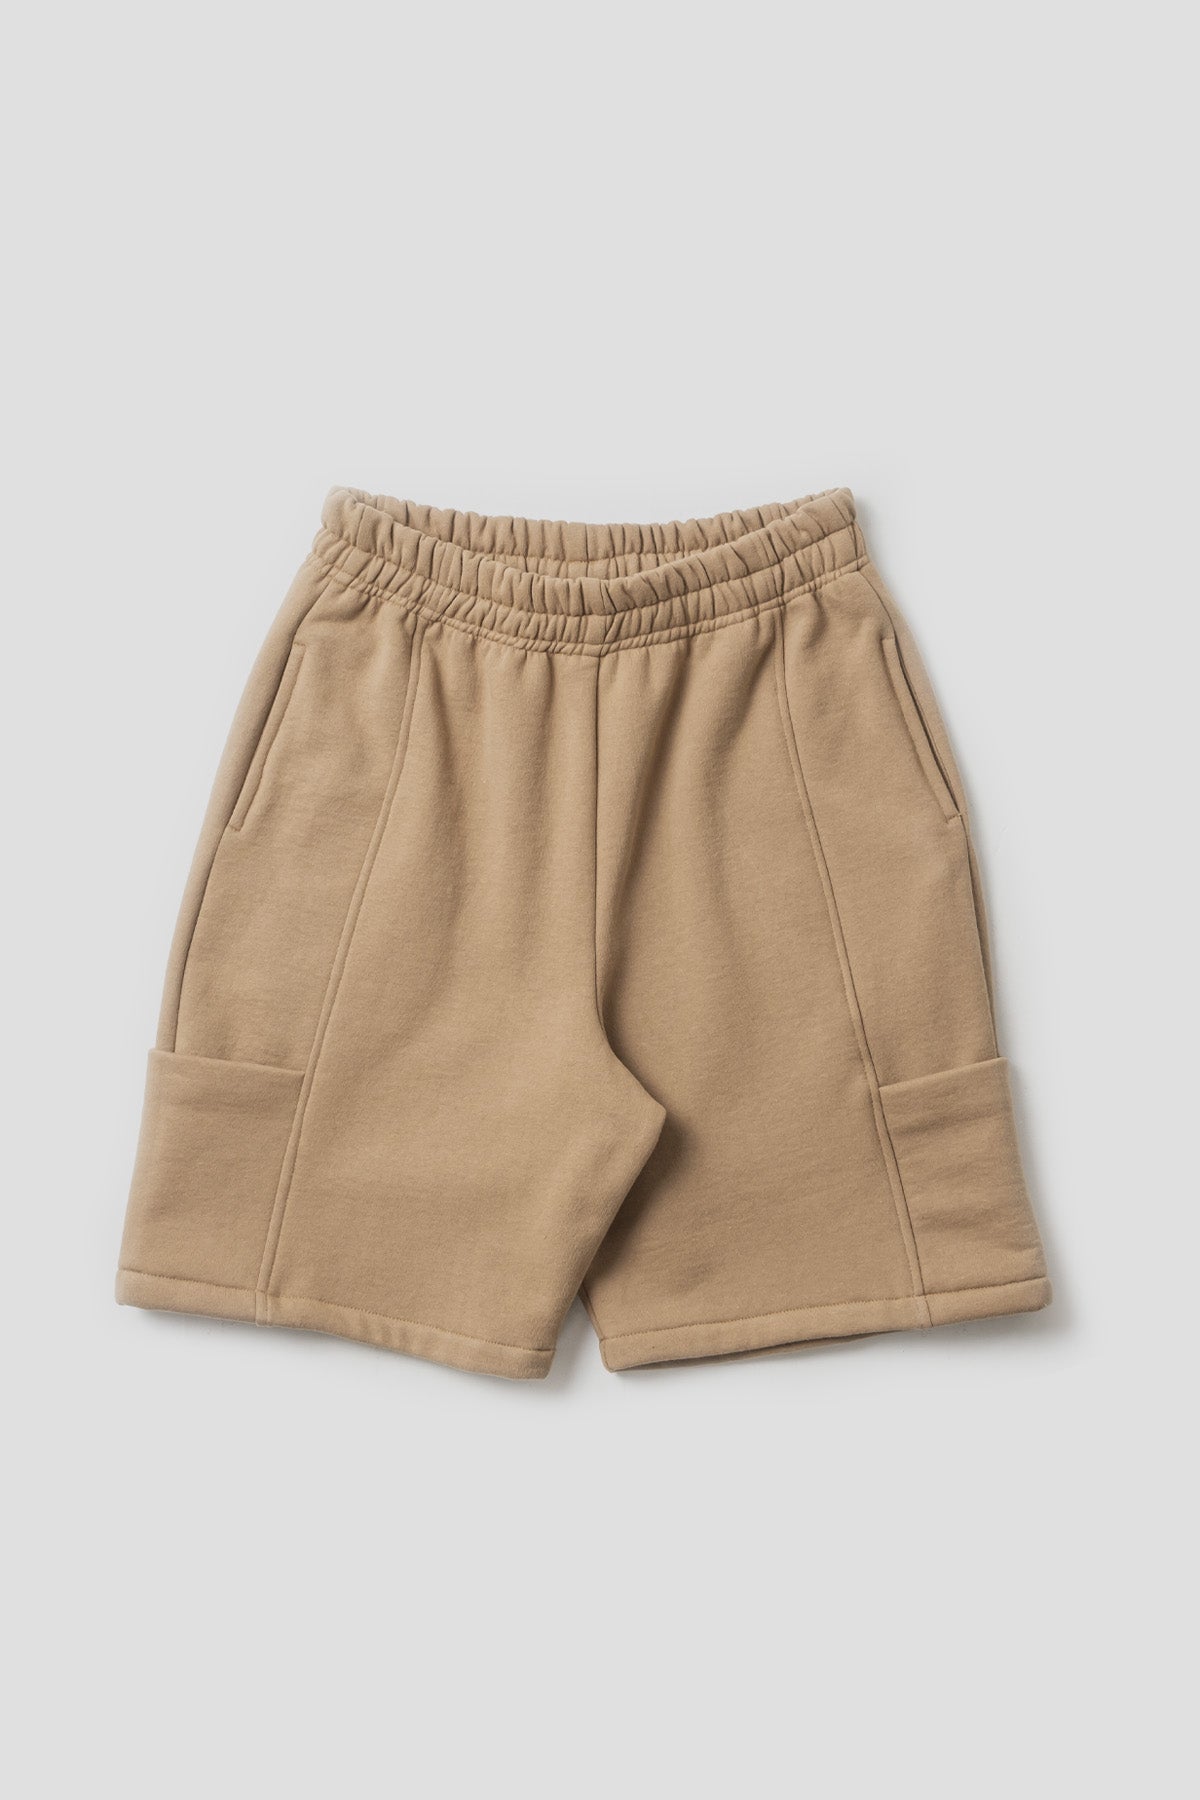 CURTIS SWEAT SHORTS - MERCY HOUSE